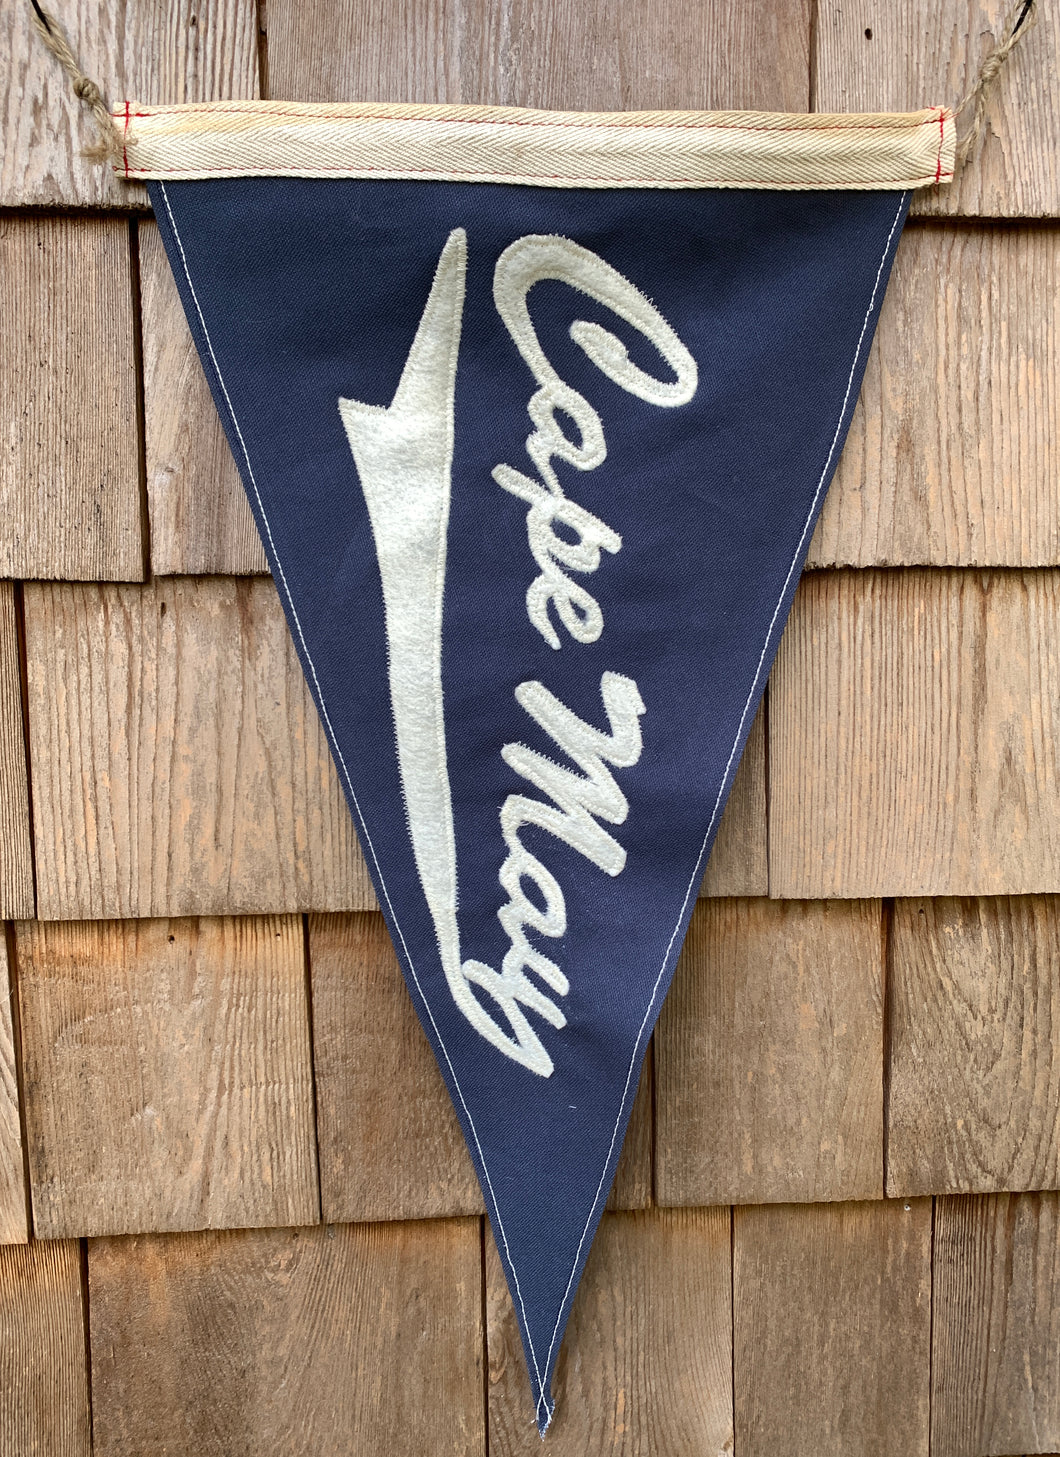 Cape May NJ - Vintage Styled Town Flag